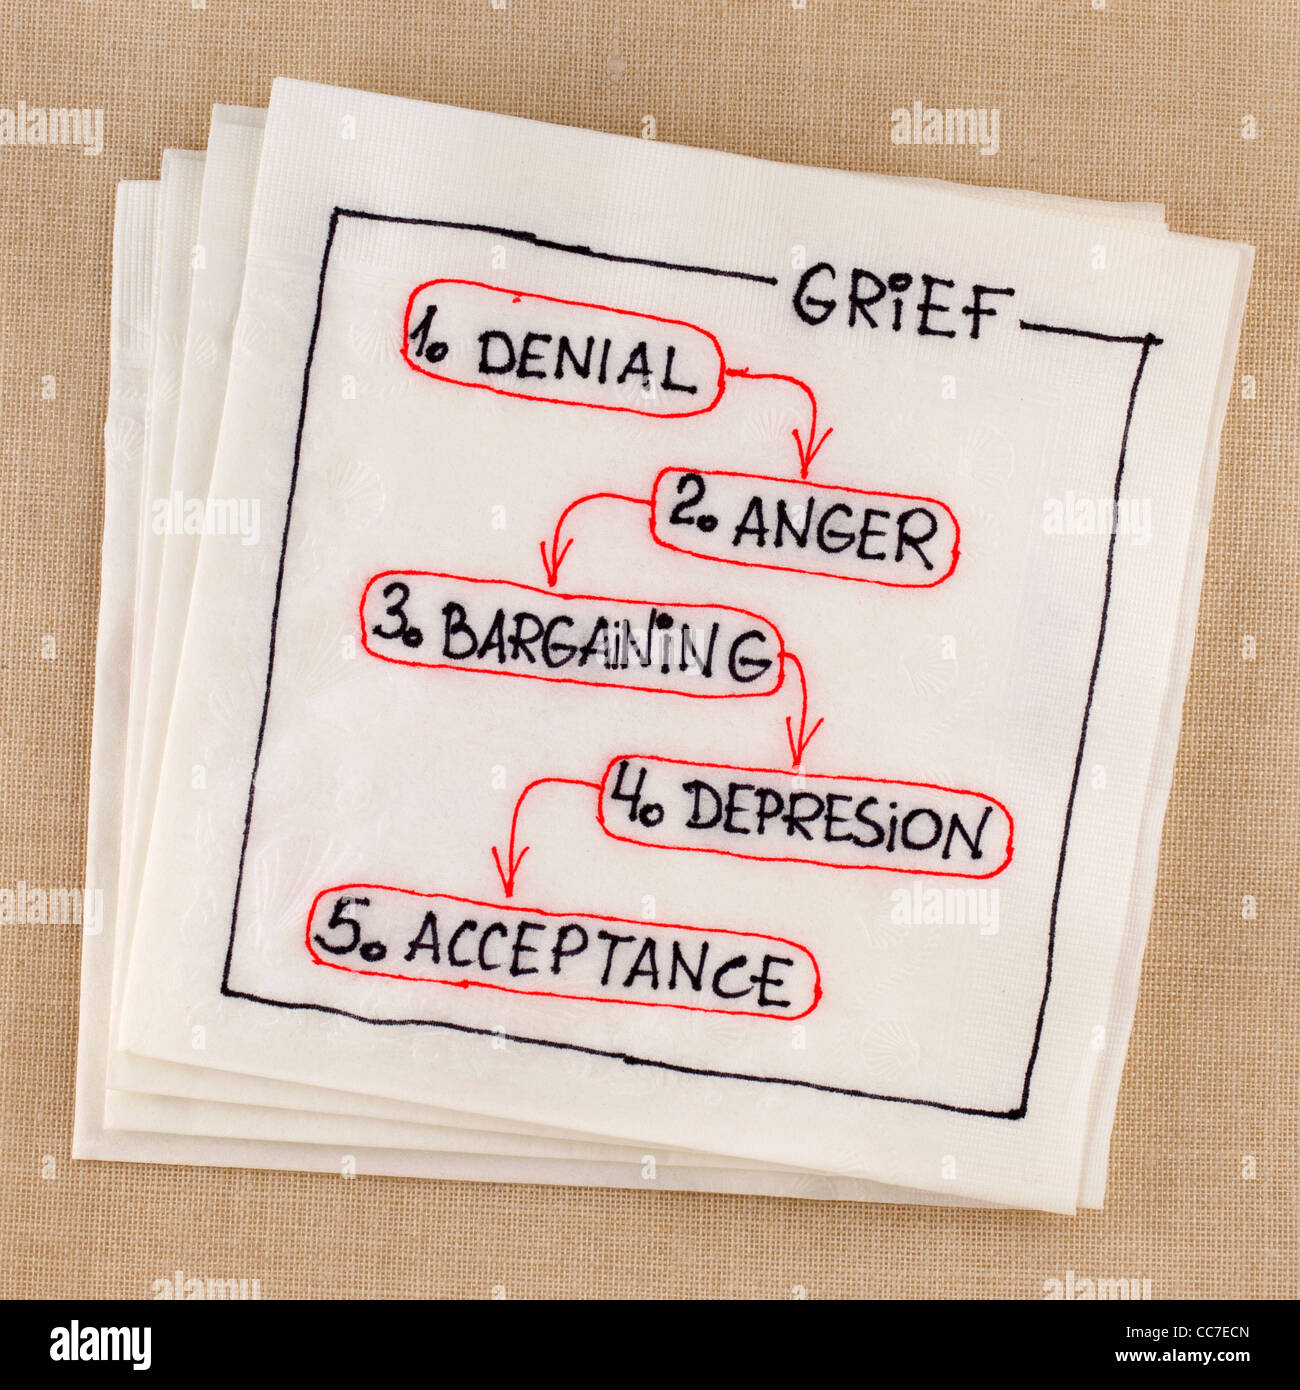 five stages of grief (denial, anger, bargaining, depression, acceptance) concept - napkin sketch Stock Photo